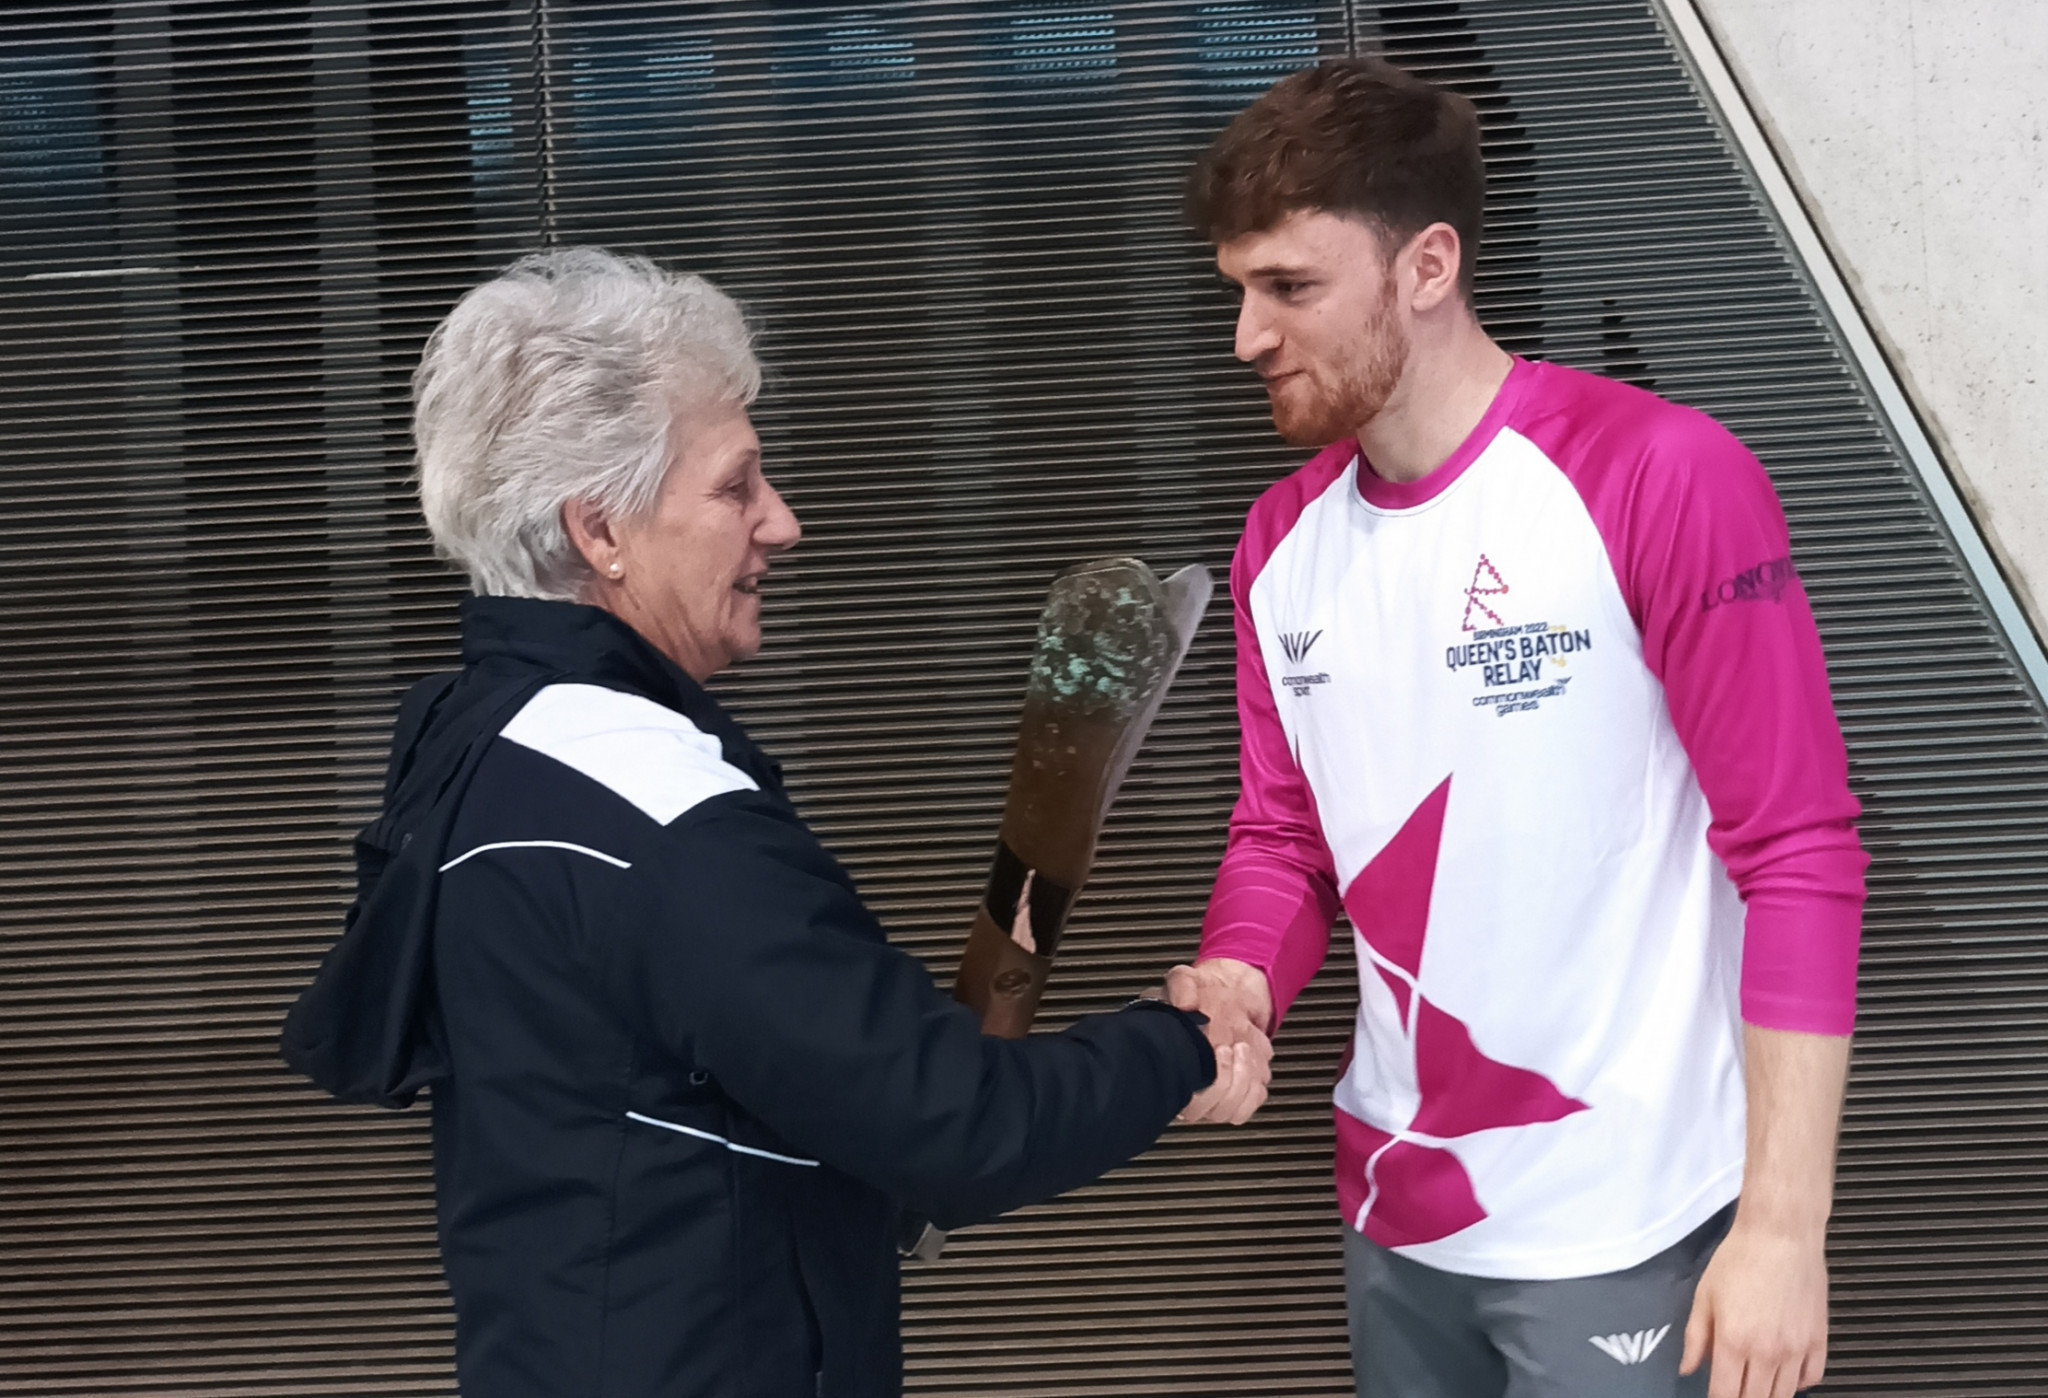 Dame Louise handed the Baton to Olympic synchronised diving champion Matty Lee before it flies to the Falkland Islands next week ©ITG